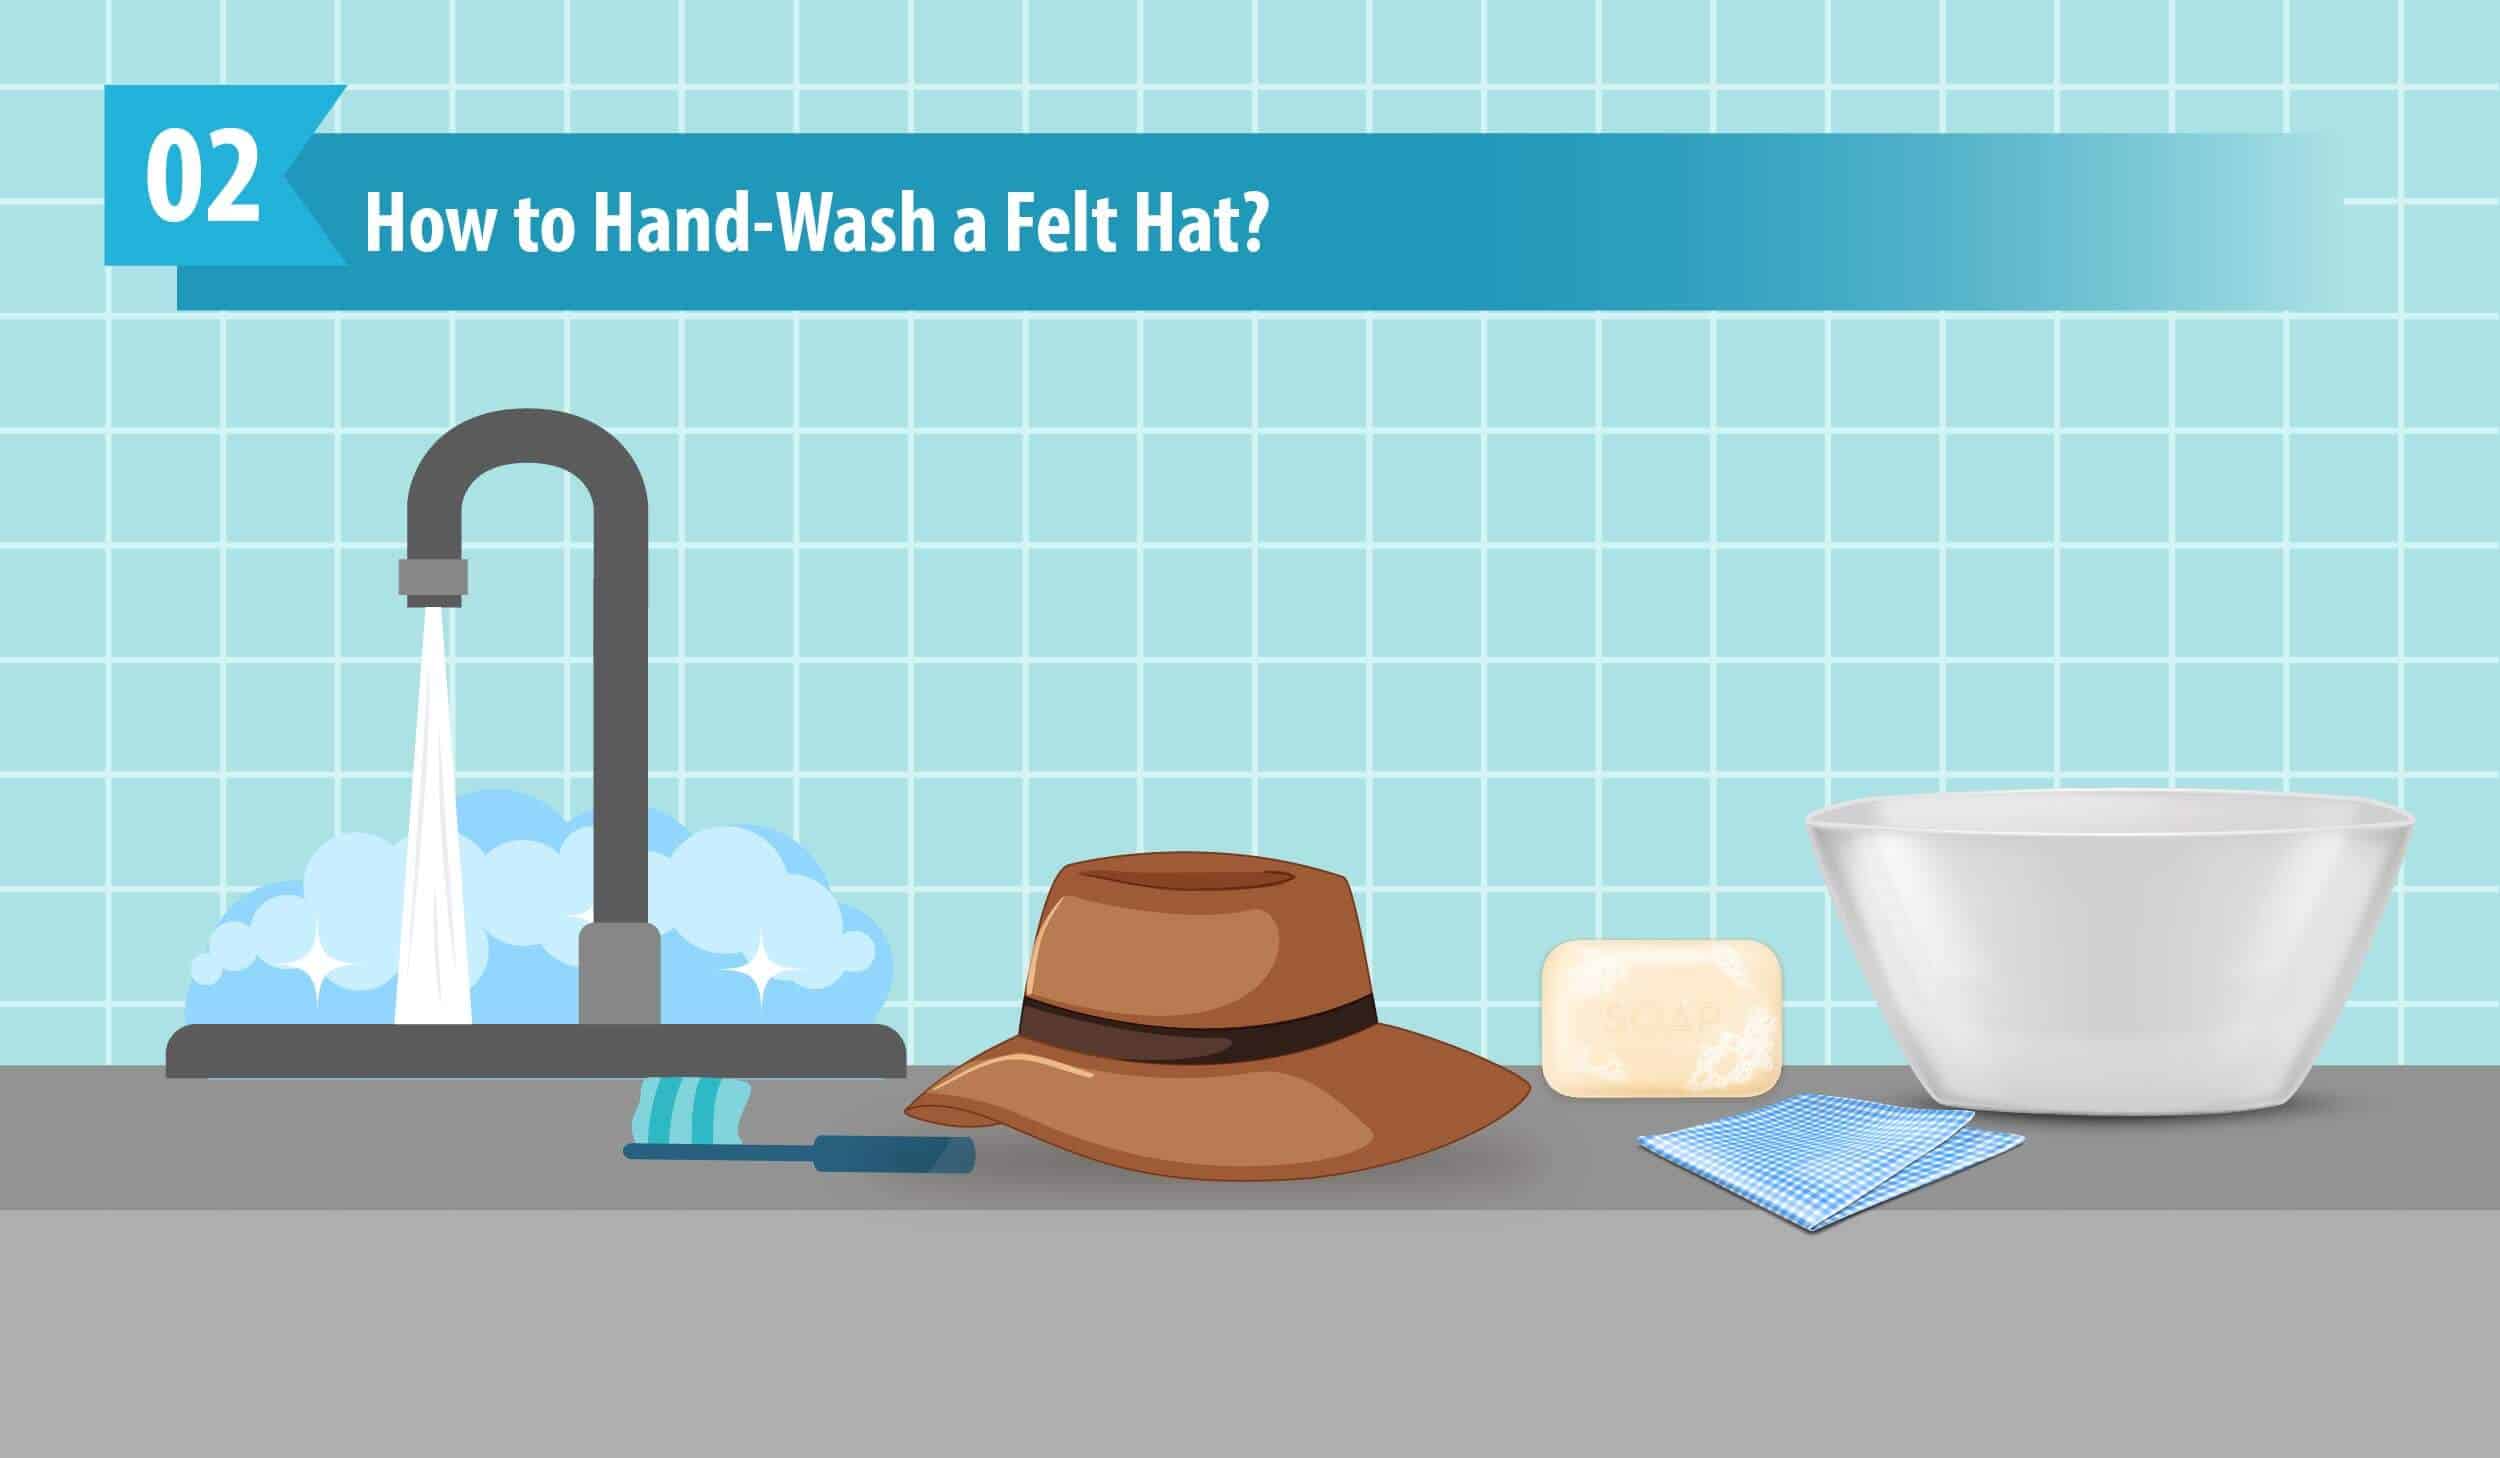 How to Hand-Wash a Felt Hat